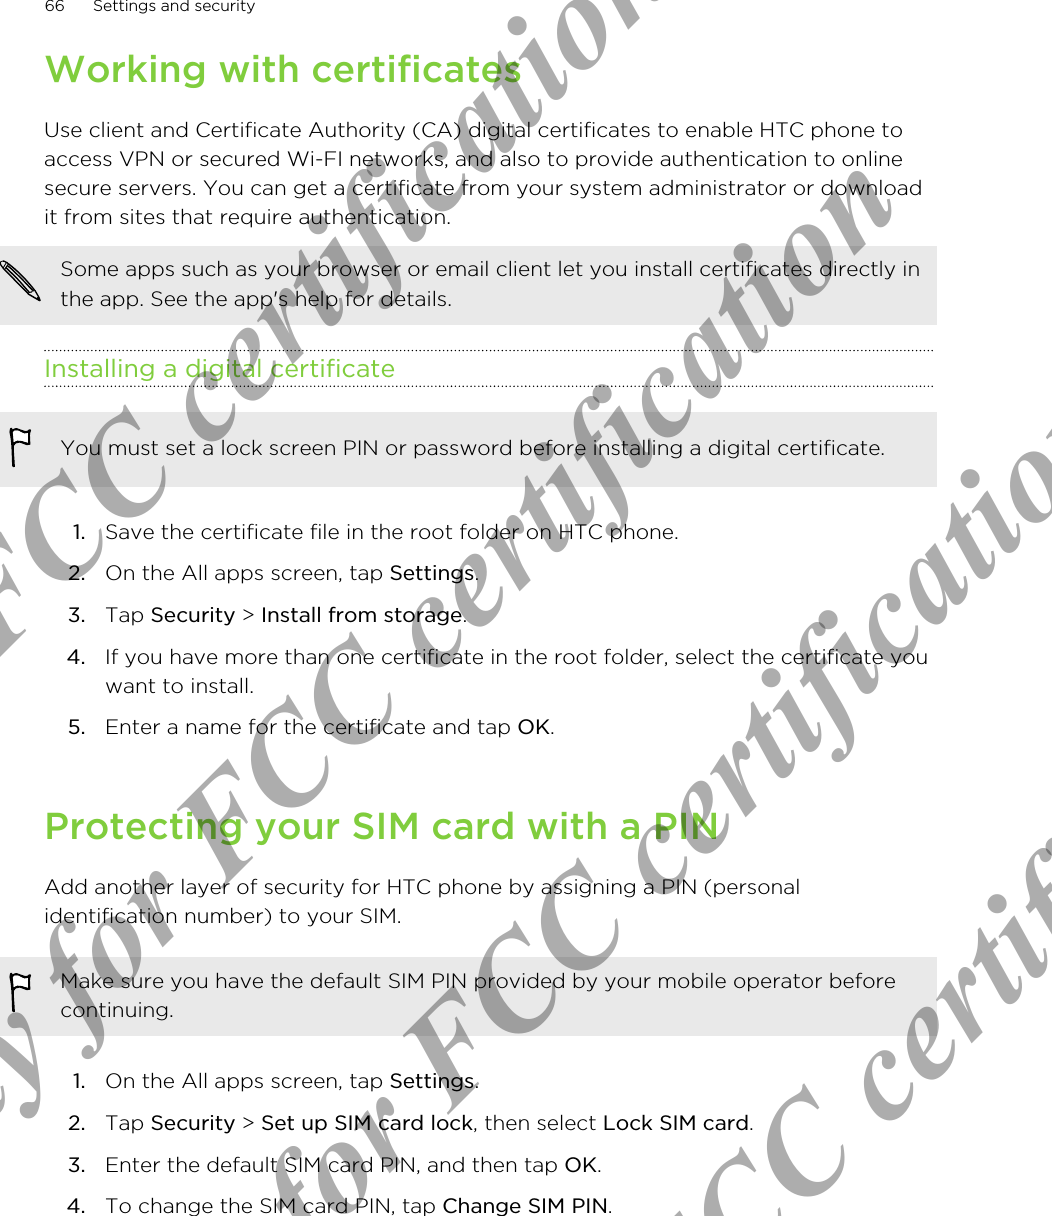 Working with certificatesUse client and Certificate Authority (CA) digital certificates to enable HTC phone toaccess VPN or secured Wi-FI networks, and also to provide authentication to onlinesecure servers. You can get a certificate from your system administrator or downloadit from sites that require authentication.Some apps such as your browser or email client let you install certificates directly inthe app. See the app&apos;s help for details.Installing a digital certificateYou must set a lock screen PIN or password before installing a digital certificate.1. Save the certificate file in the root folder on HTC phone.2. On the All apps screen, tap Settings.3. Tap Security &gt; Install from storage.4. If you have more than one certificate in the root folder, select the certificate youwant to install.5. Enter a name for the certificate and tap OK.Protecting your SIM card with a PINAdd another layer of security for HTC phone by assigning a PIN (personalidentification number) to your SIM.Make sure you have the default SIM PIN provided by your mobile operator beforecontinuing.1. On the All apps screen, tap Settings.2. Tap Security &gt; Set up SIM card lock, then select Lock SIM card.3. Enter the default SIM card PIN, and then tap OK.4. To change the SIM card PIN, tap Change SIM PIN.66 Settings and securityOnly for FCC certification  Only for FCC certification  Only for FCC certification  Only for FCC certification